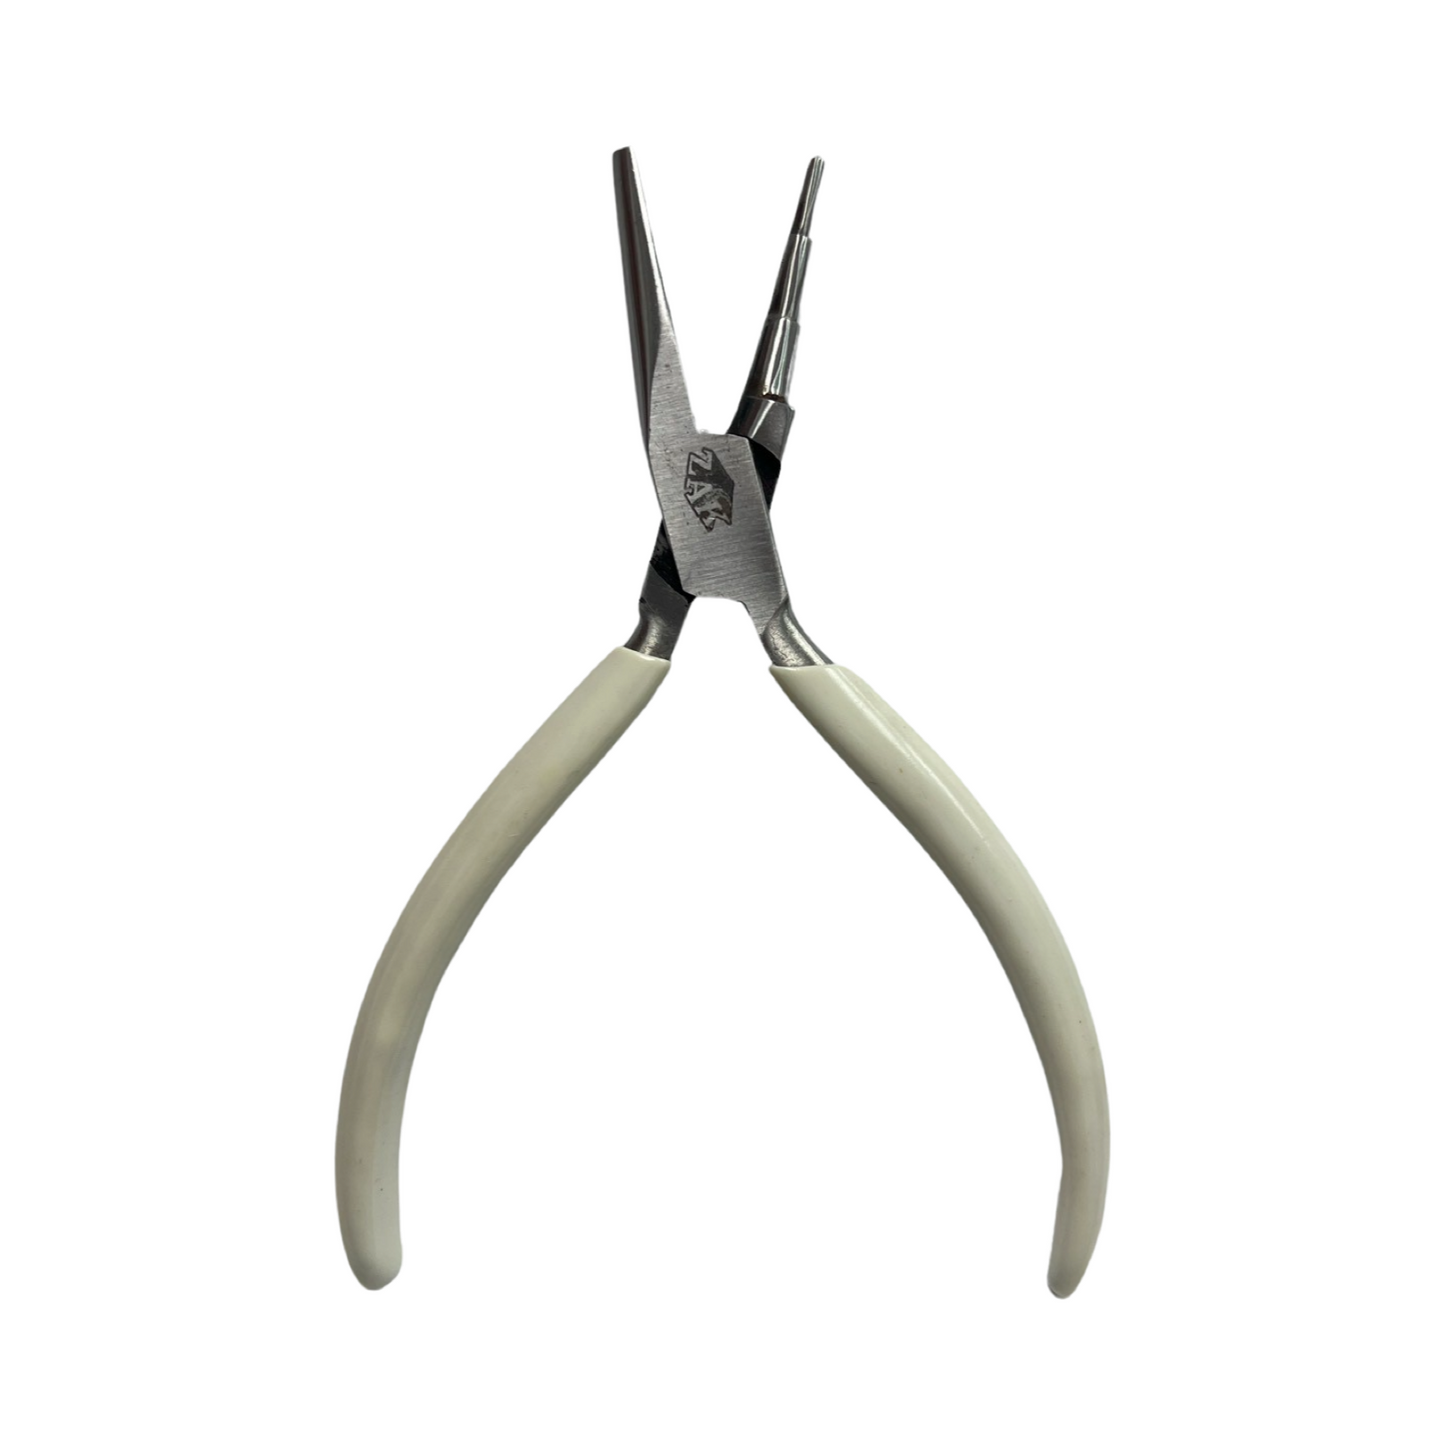 ZAK® Value Pliers - Wire Looping